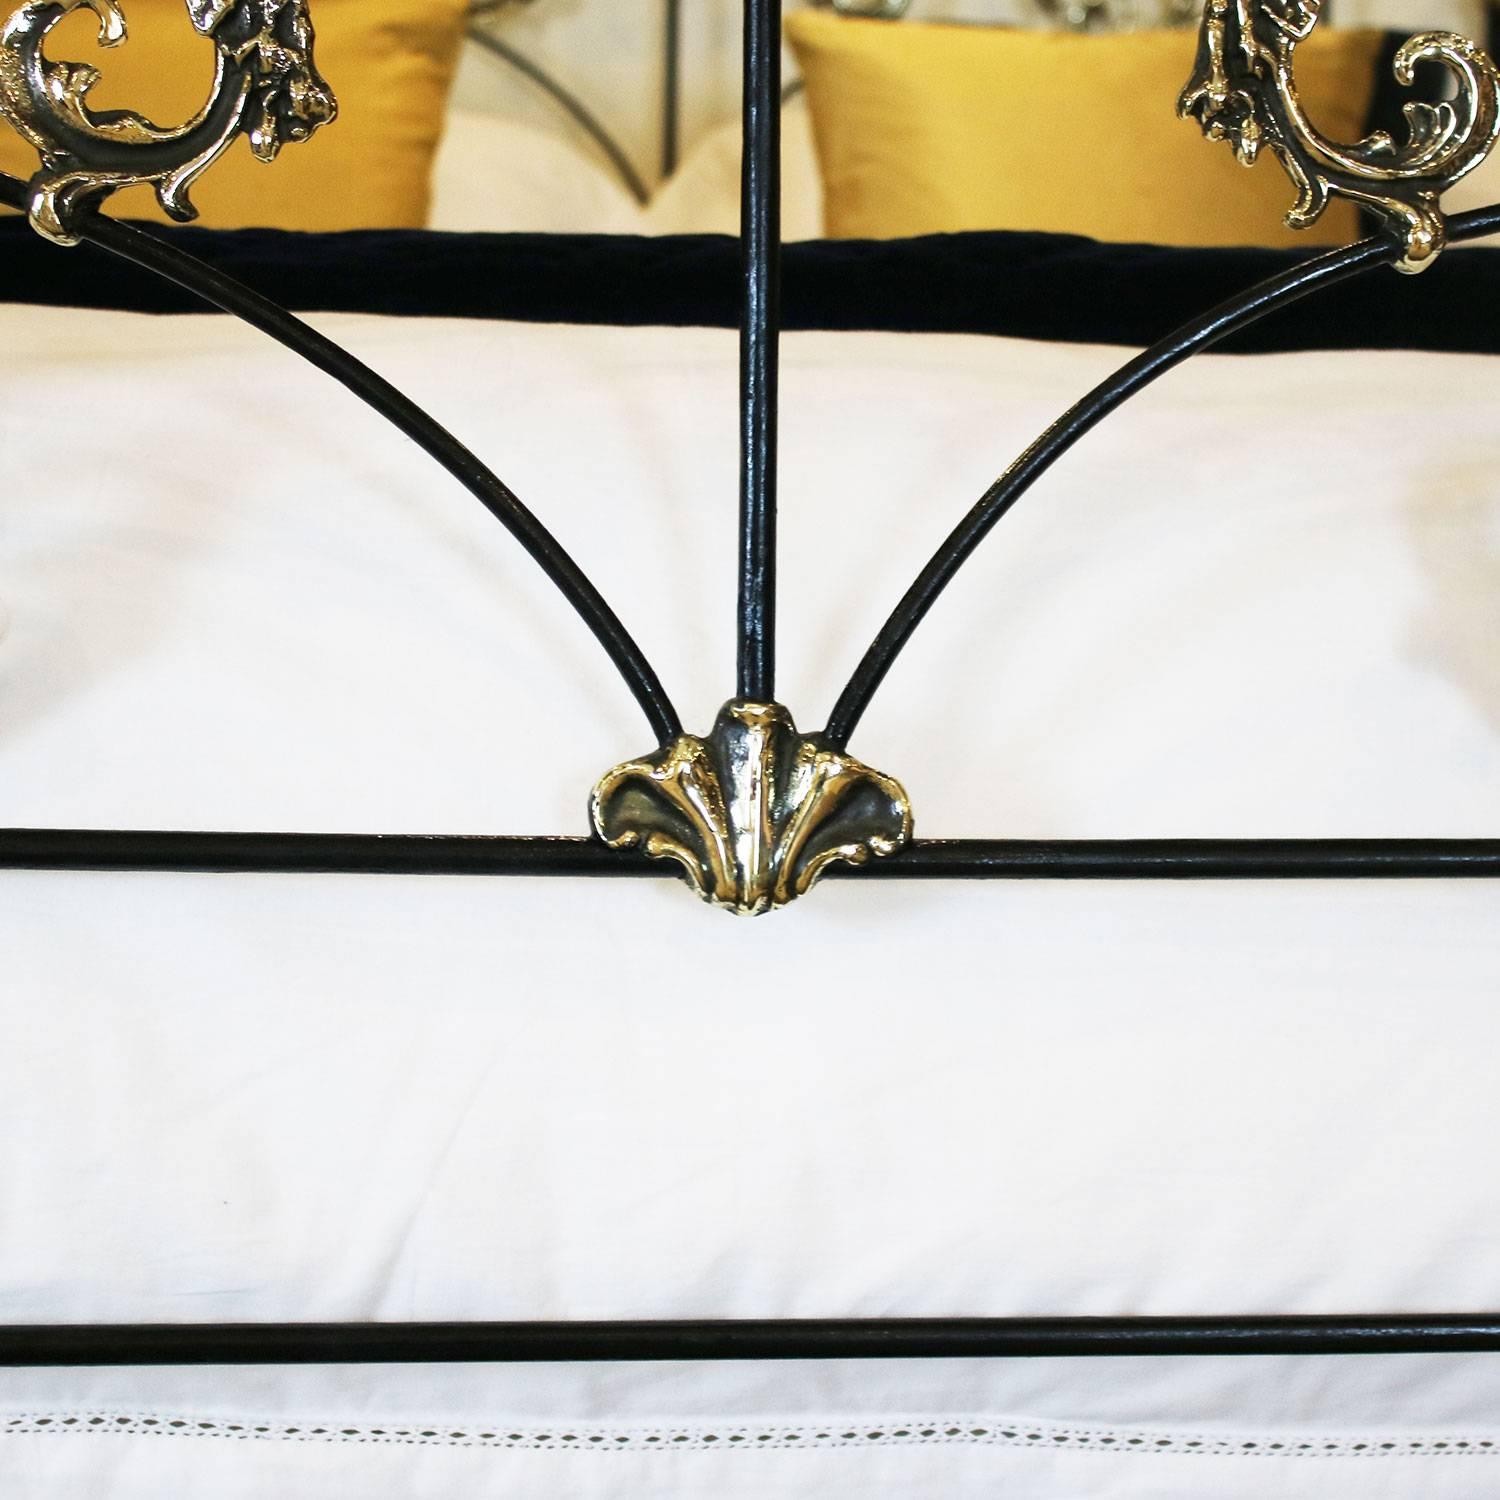 Bespoke Brass and Iron Tangier Bed - Tangier 1 2